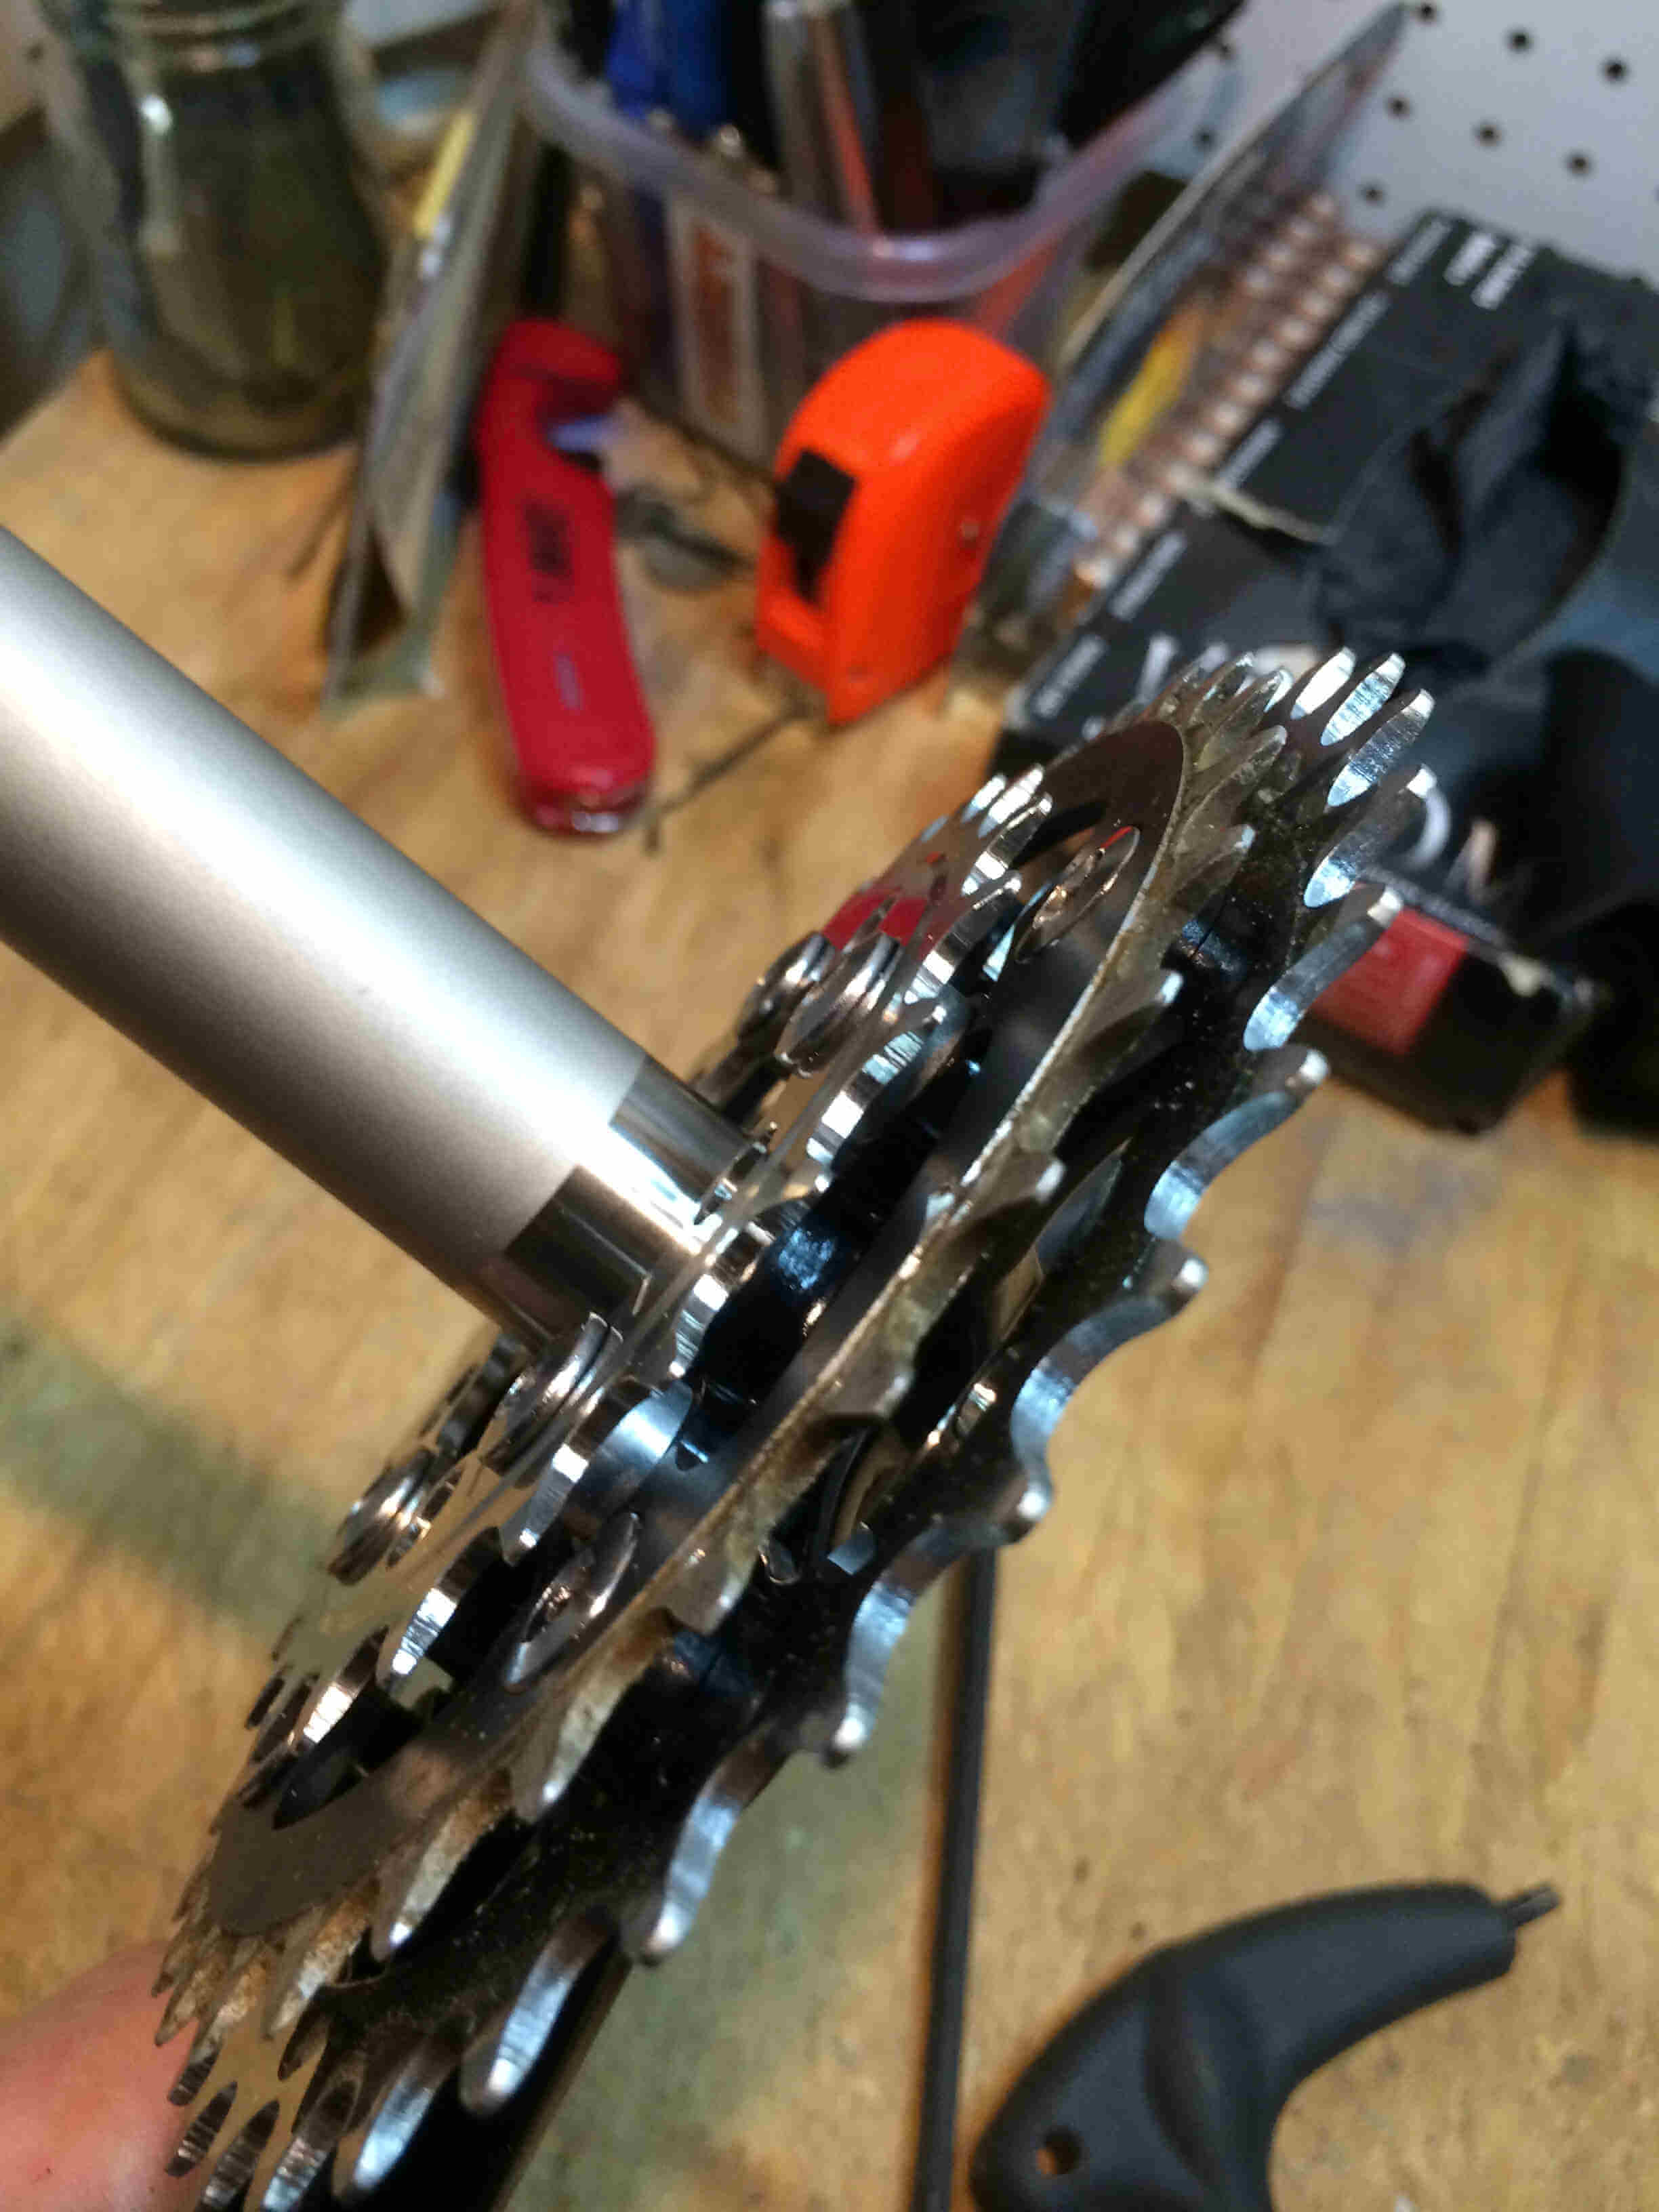 Downward view of a Surly Bikes O.D Crankset, sitting on a table, showing chainring tooth detail